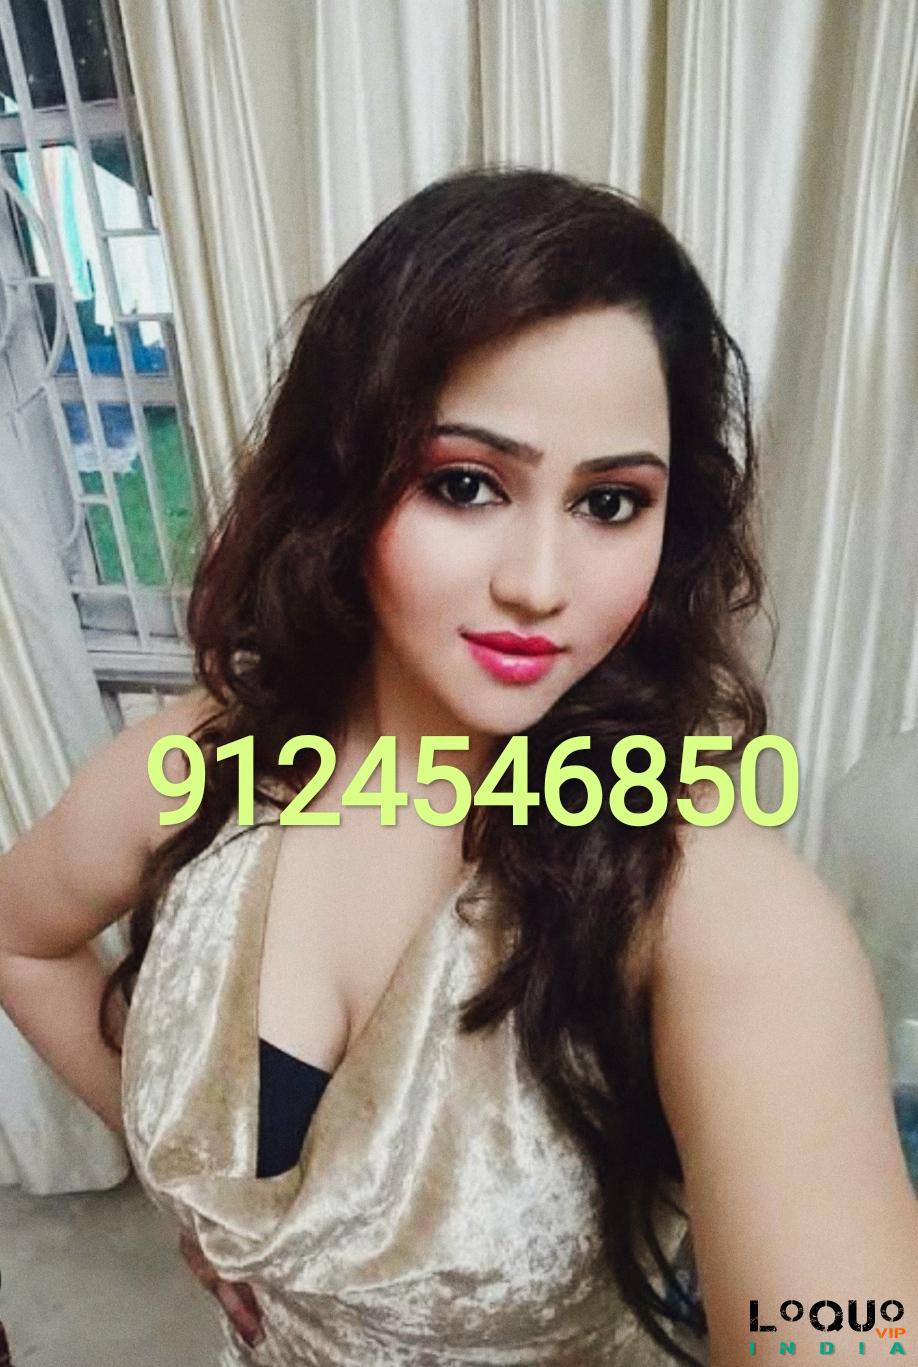 Call Girls Rajasthan: HereBEST LOW PRICE FULL NUDE VIDEO CALL SERVICE❣️9124546850